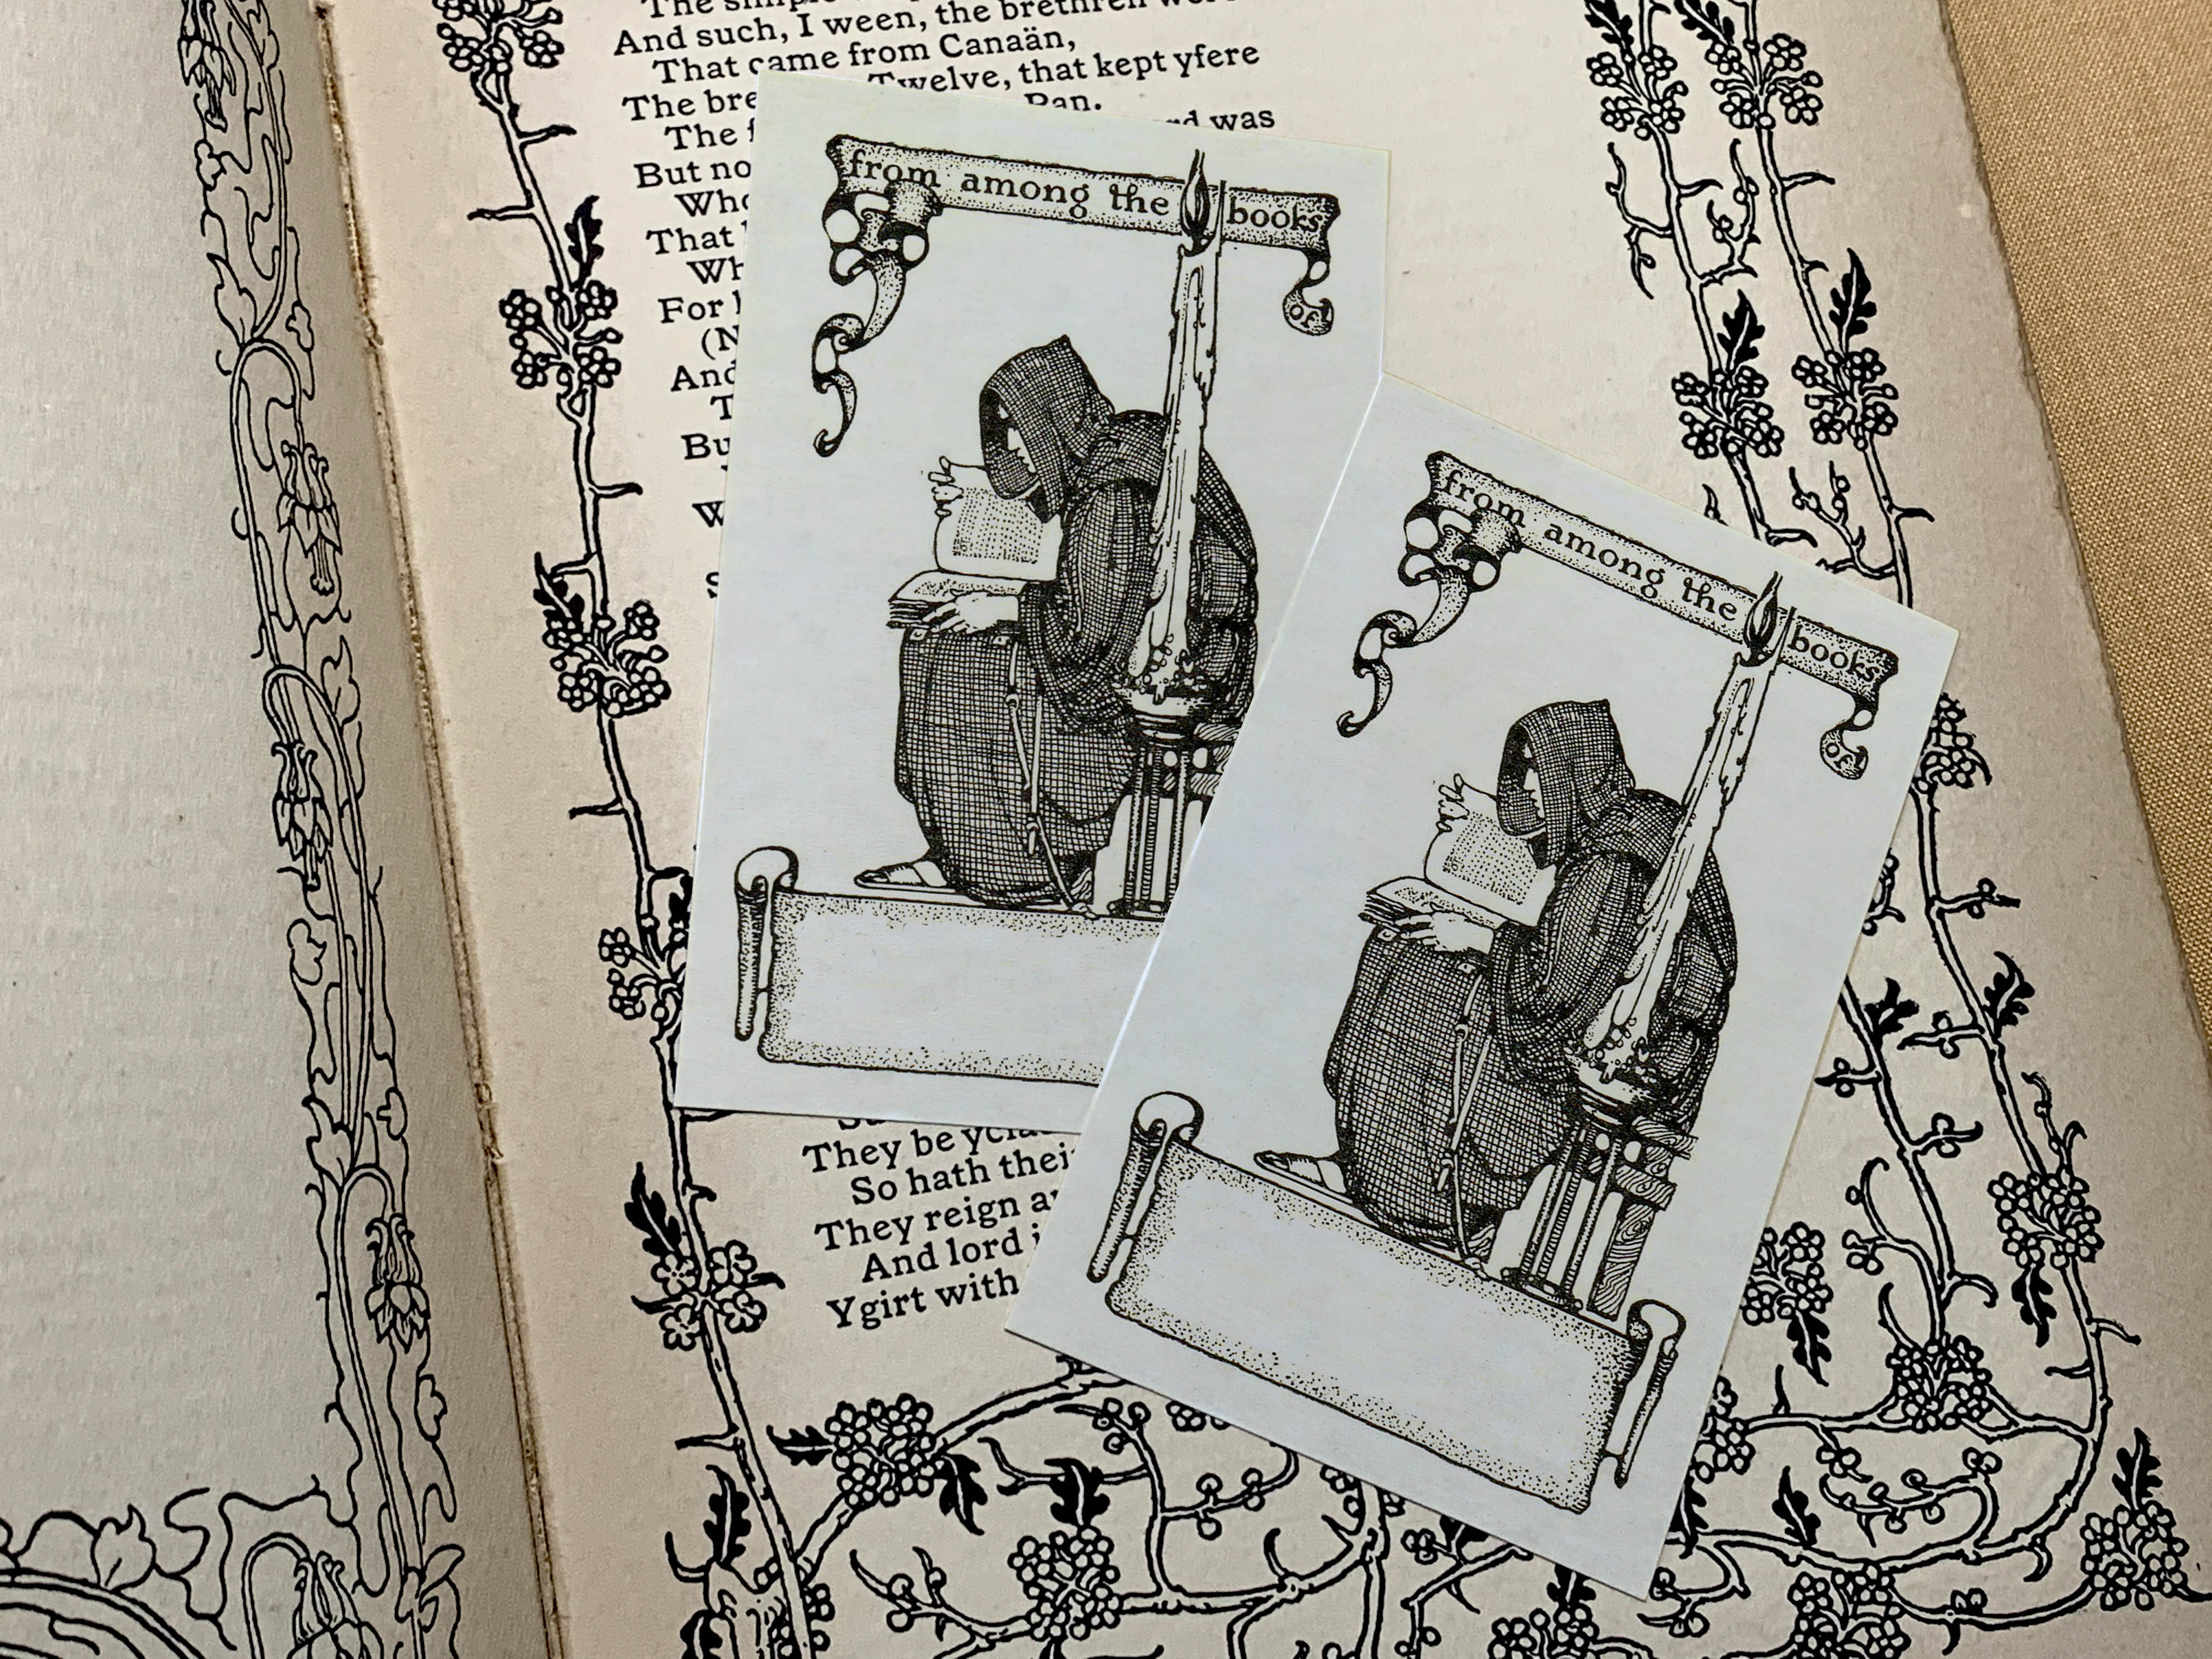 The Monk, Personalized Ex-Libris Bookplates, Crafted on Traditional Gummed Paper, 2.5in x 4in, Set of 30